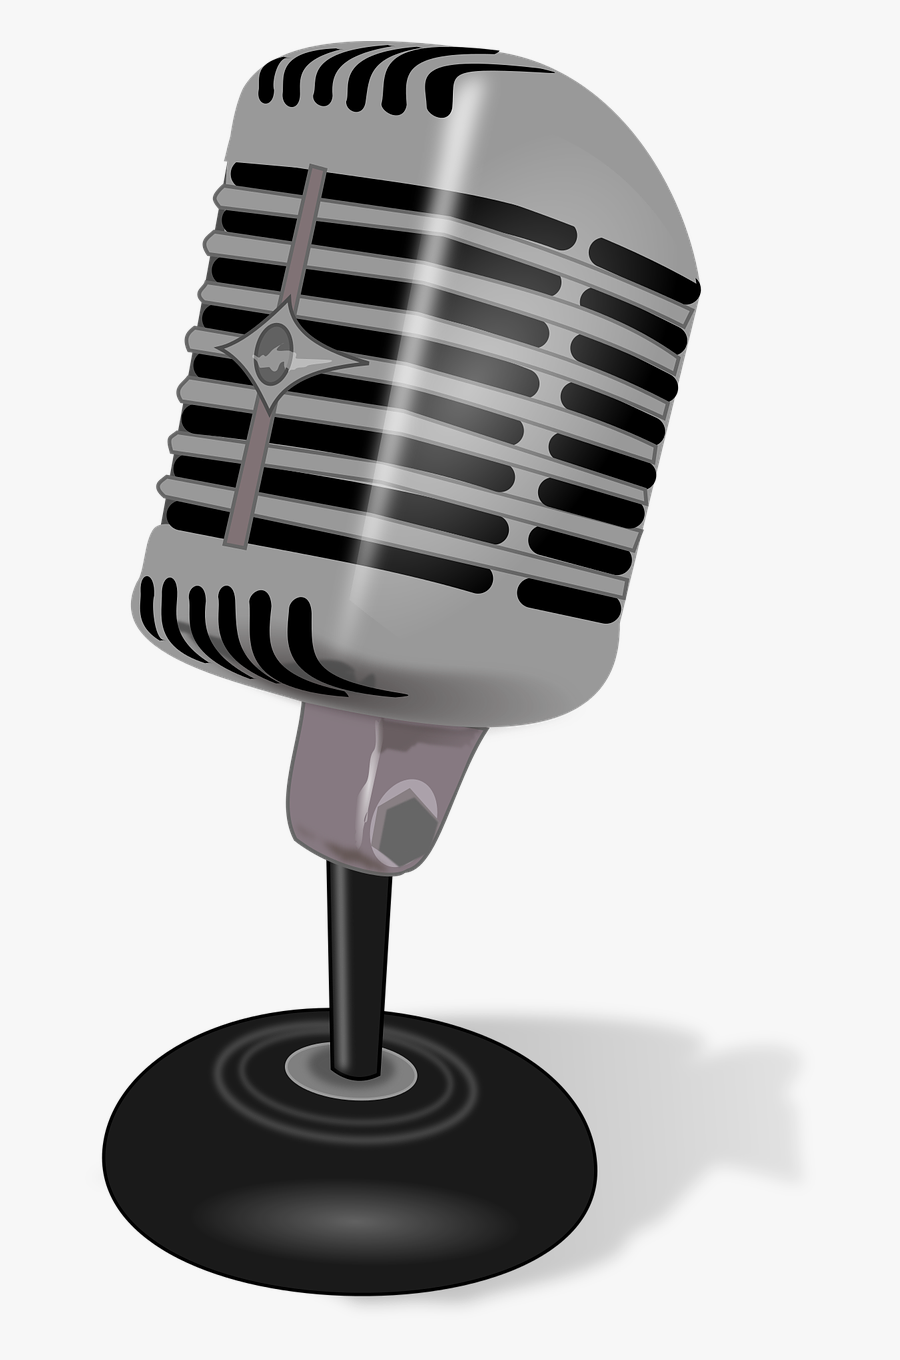 Microphone Free To Use Clip Art - Microphone Free Clip Art, Transparent Clipart